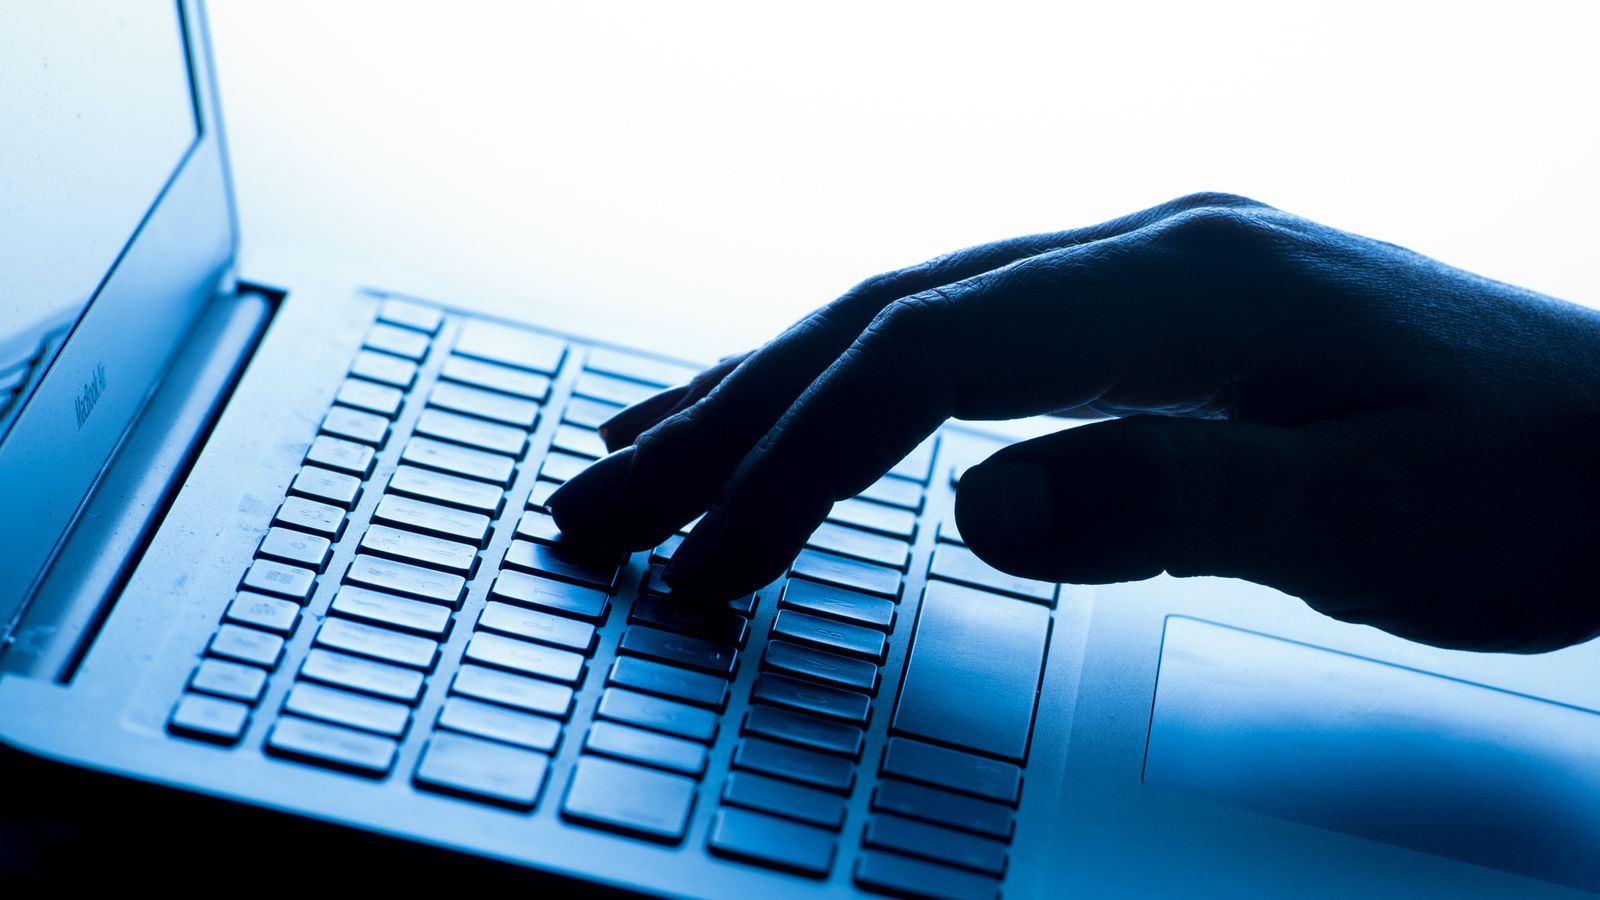 Car buyers beware - online scams are soaring with the average victim losing £1,000